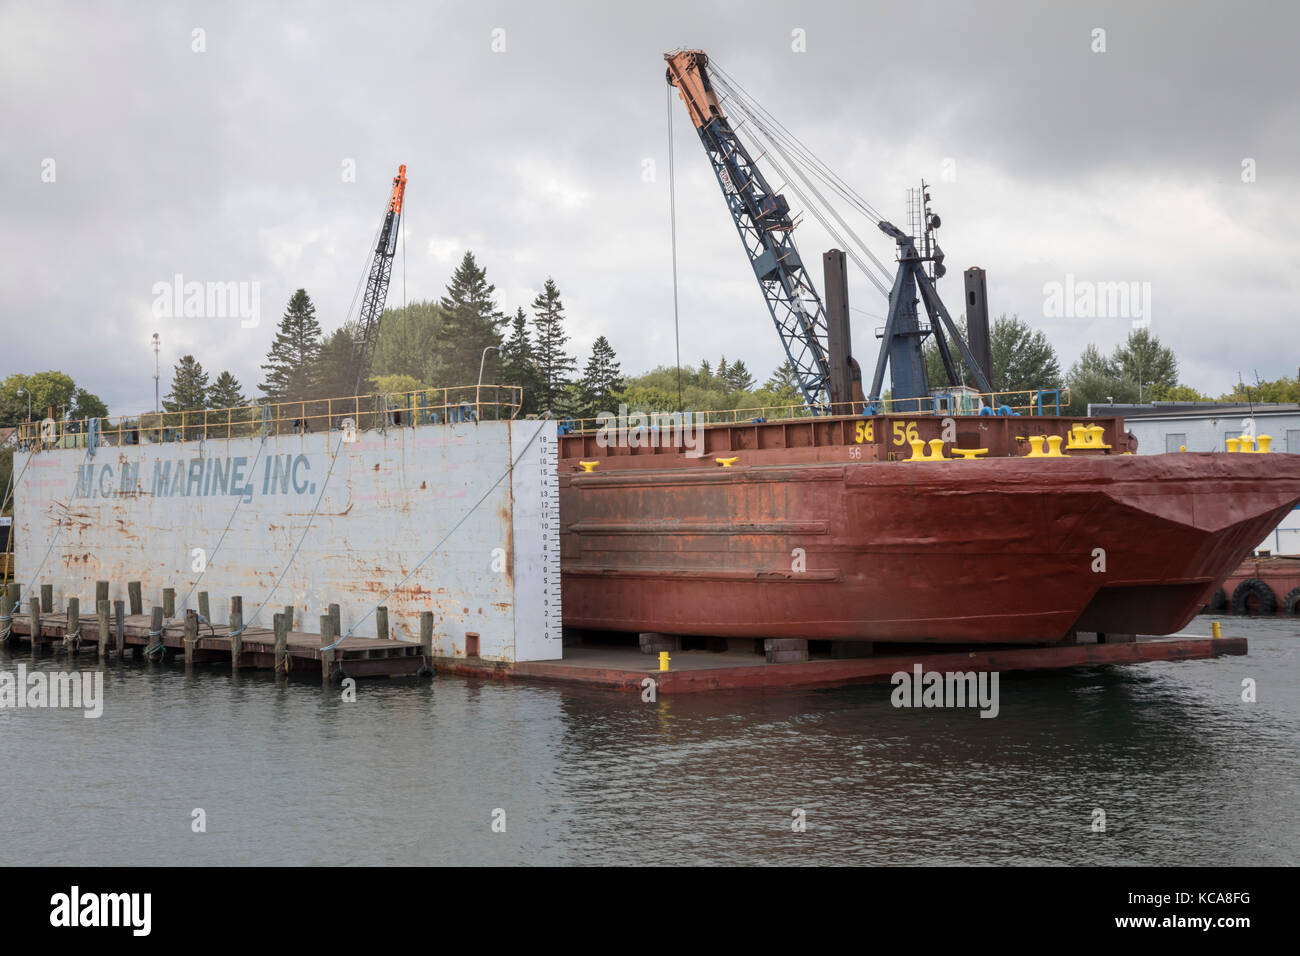 Sault Ste Marie, Michigan - A barge in a dry dock on the St. Mary's River. Stock Photo